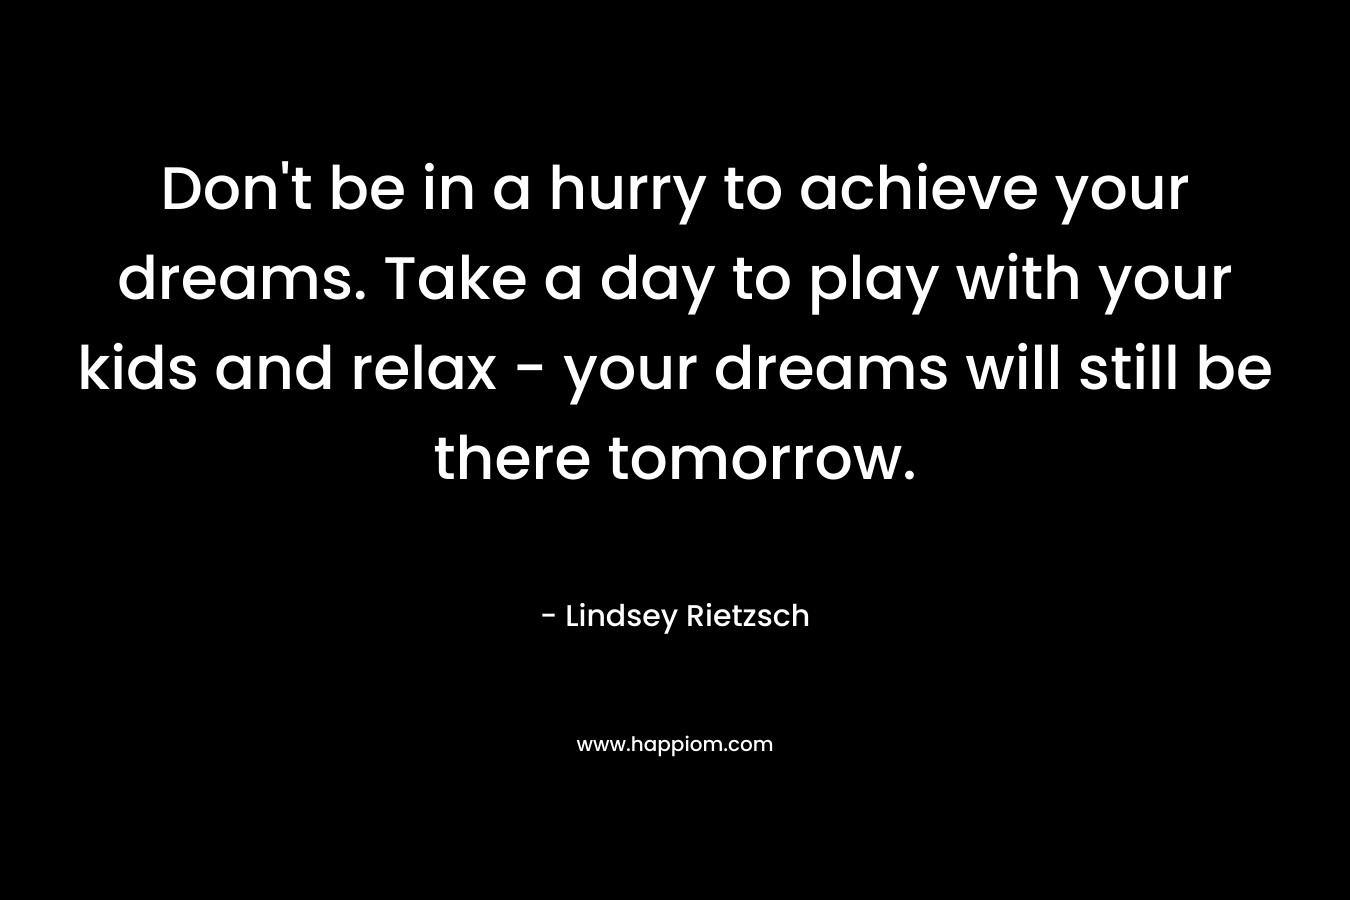 Don't be in a hurry to achieve your dreams. Take a day to play with your kids and relax - your dreams will still be there tomorrow.